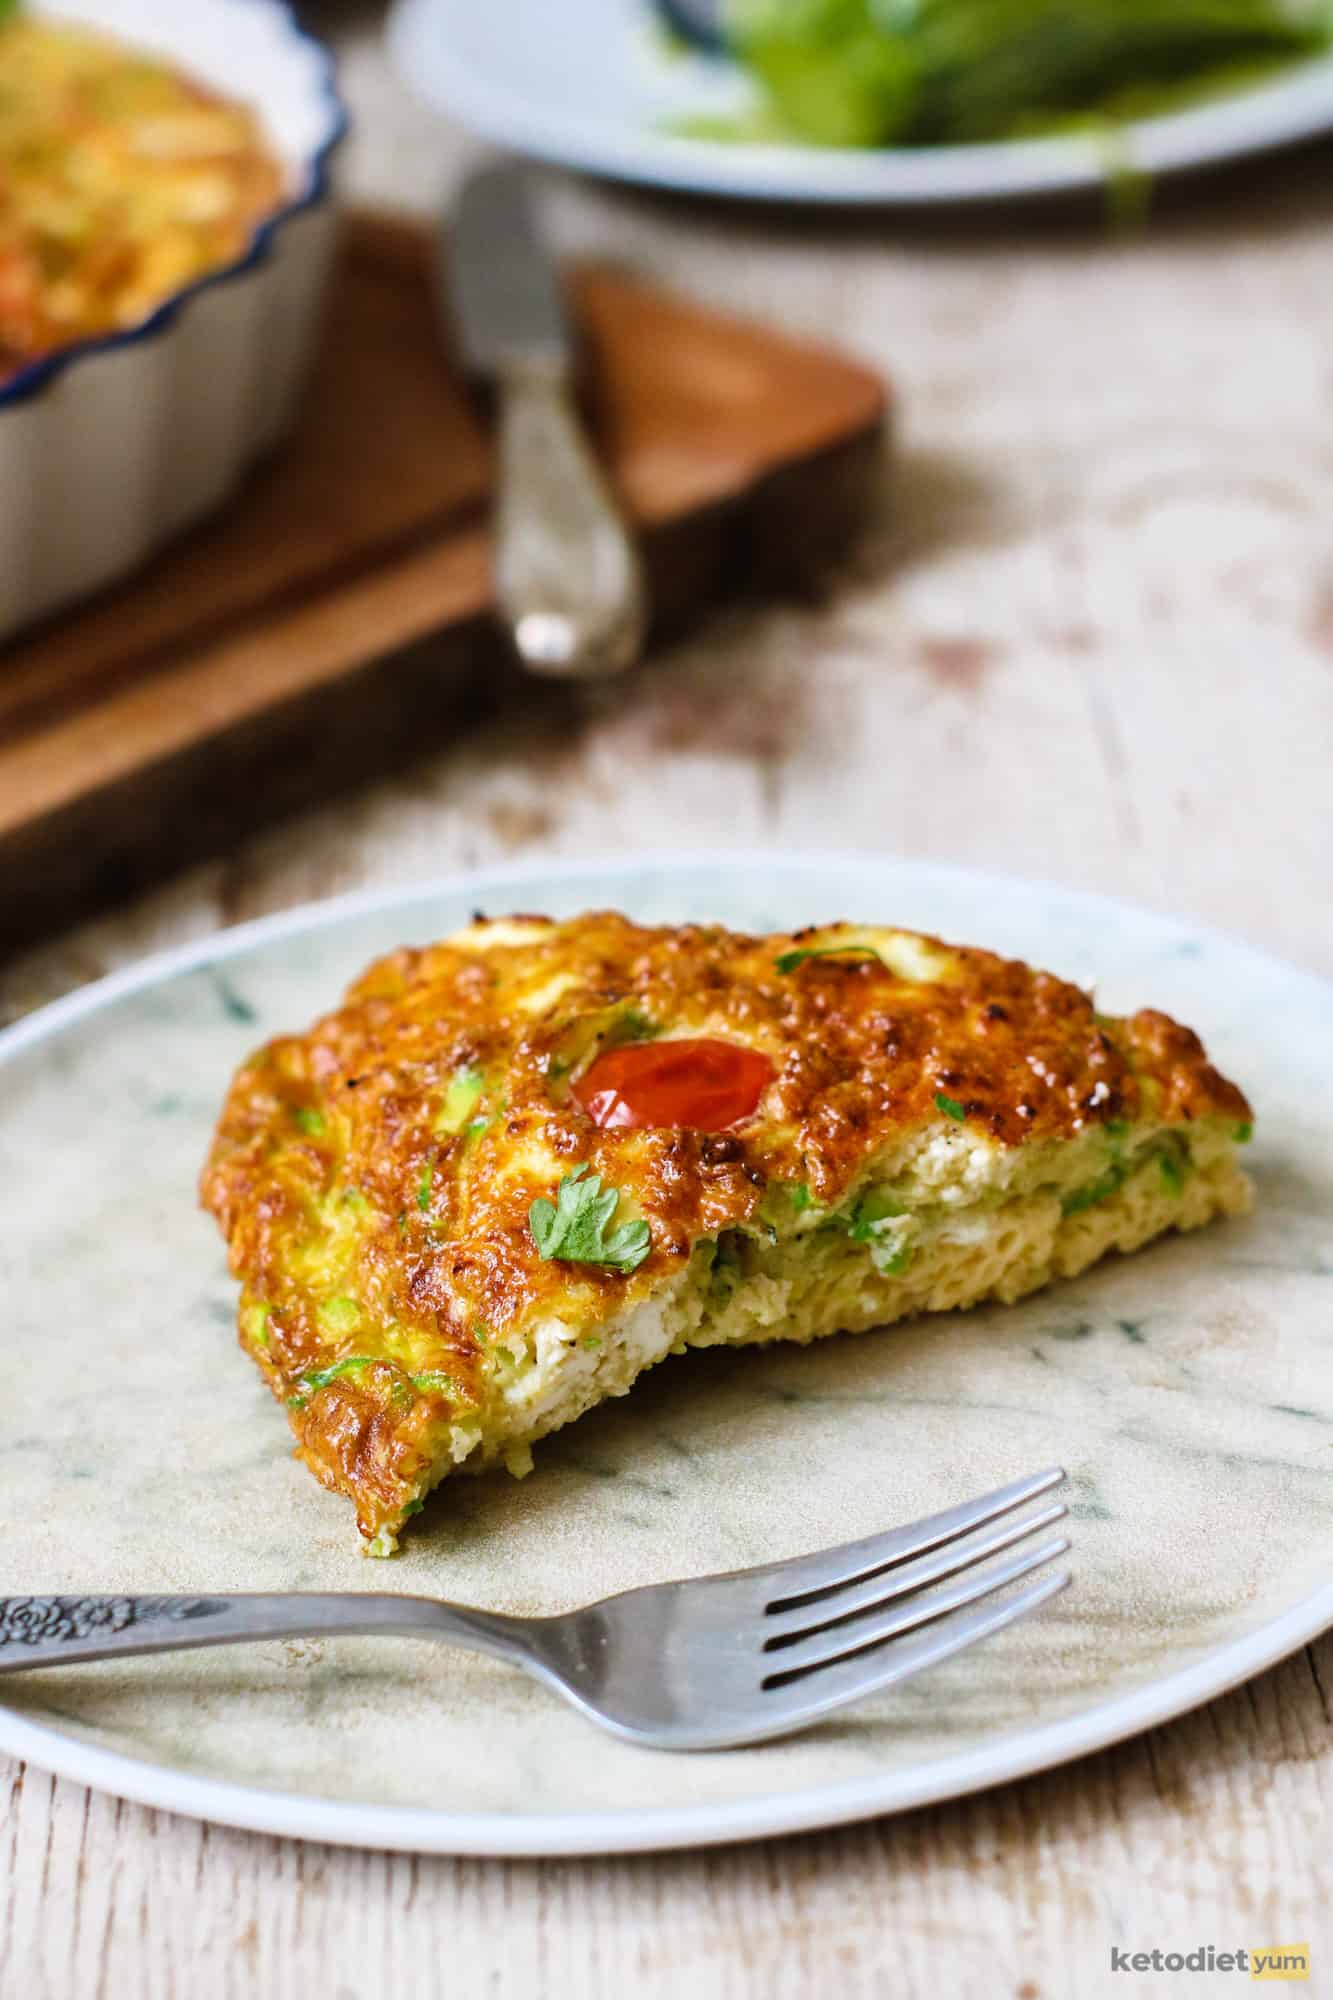 A slice of low carb frittata made with zucchini, goat cheese and cherry tomatoes